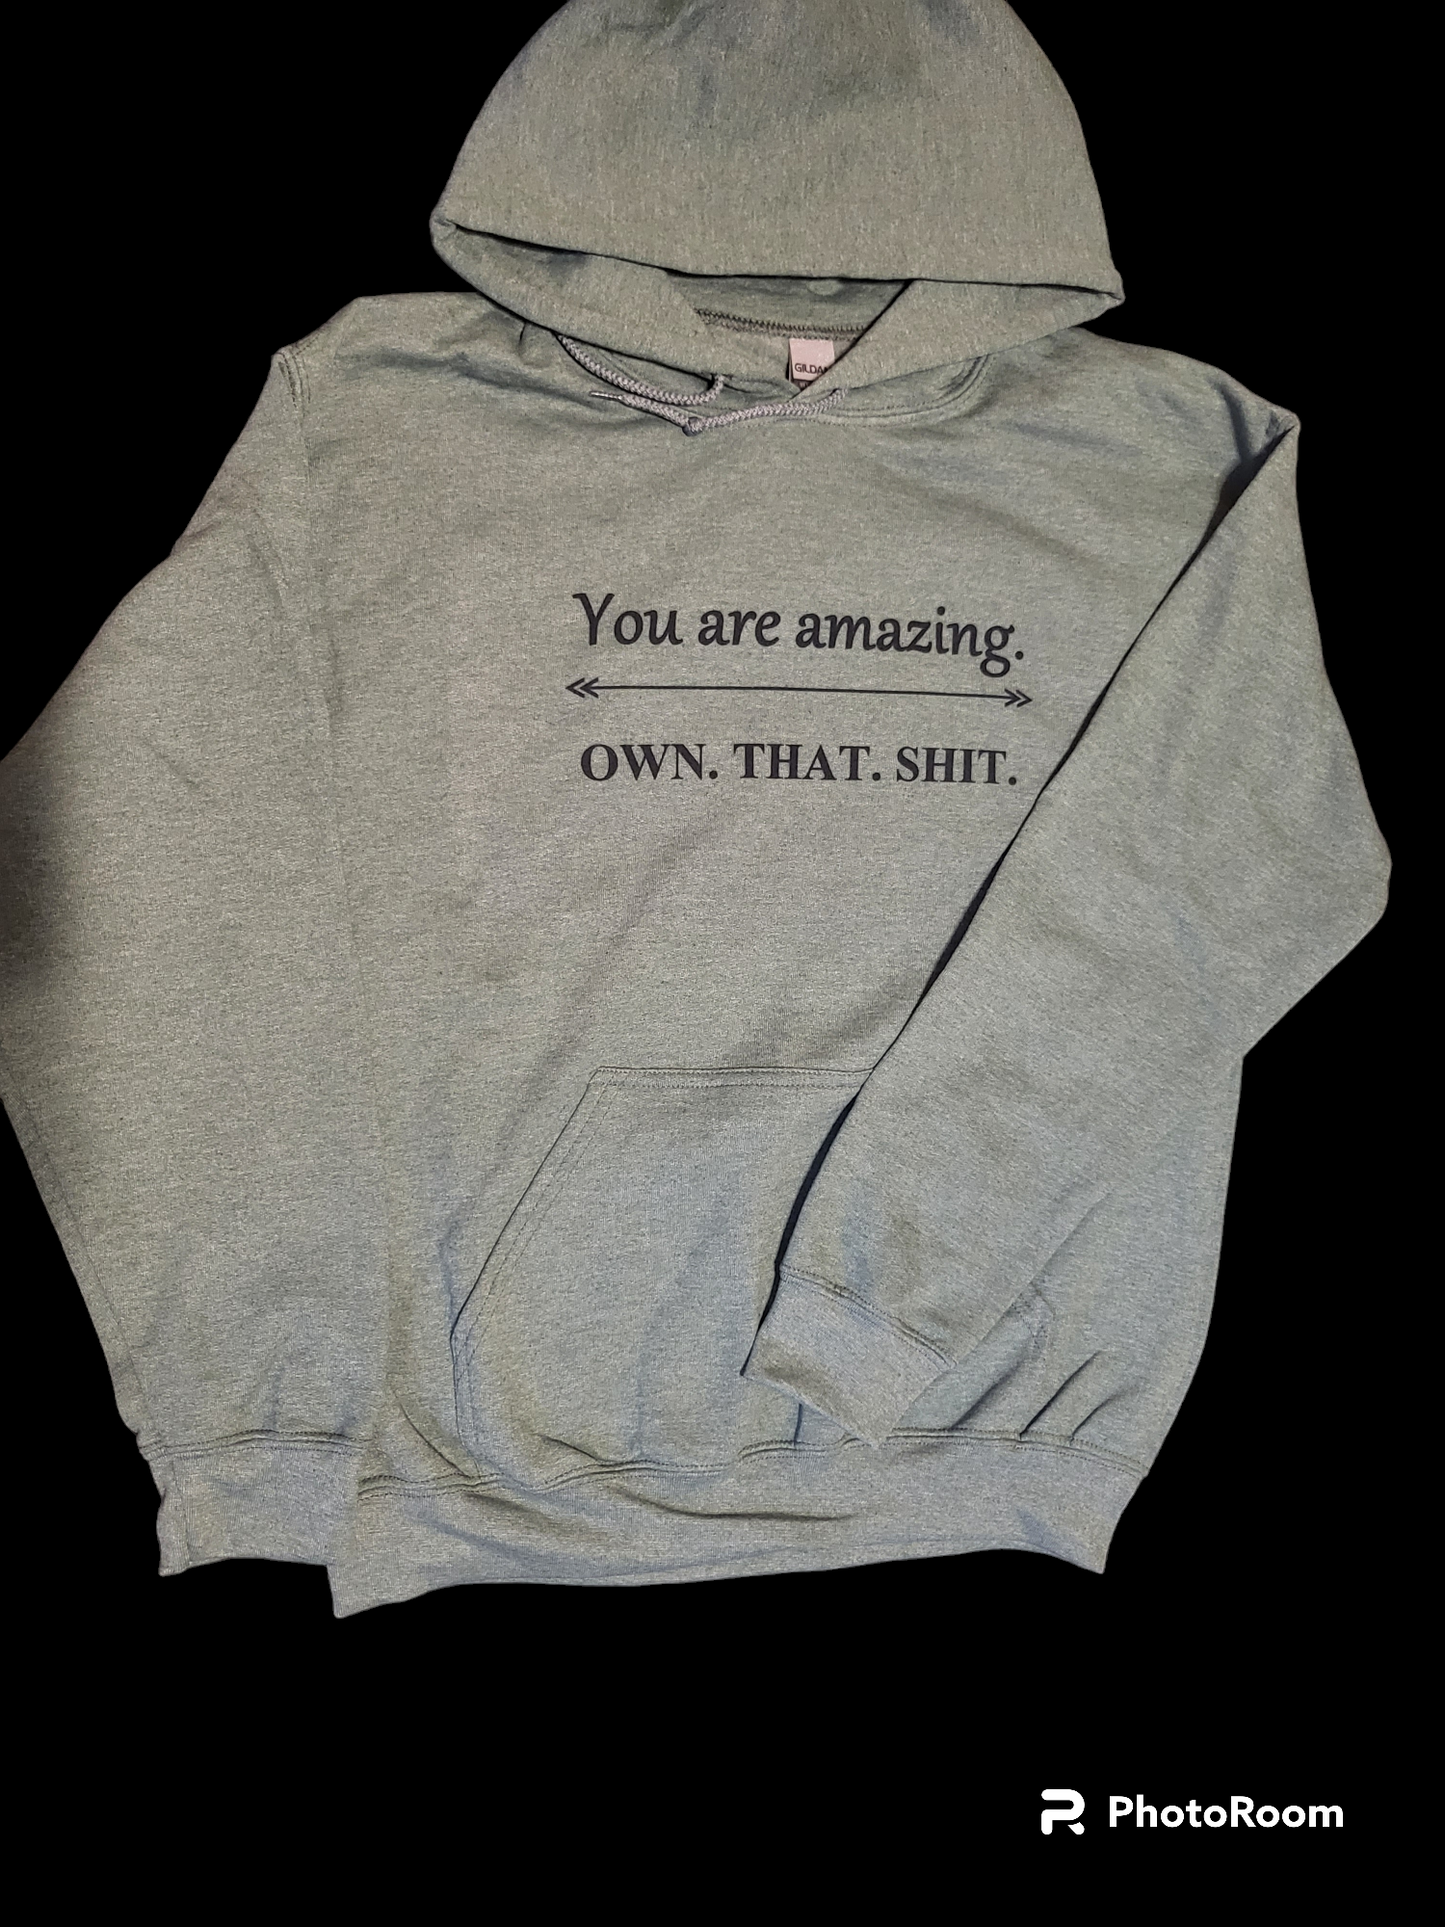 Sassy Hoodies - You are amazing! Heather green